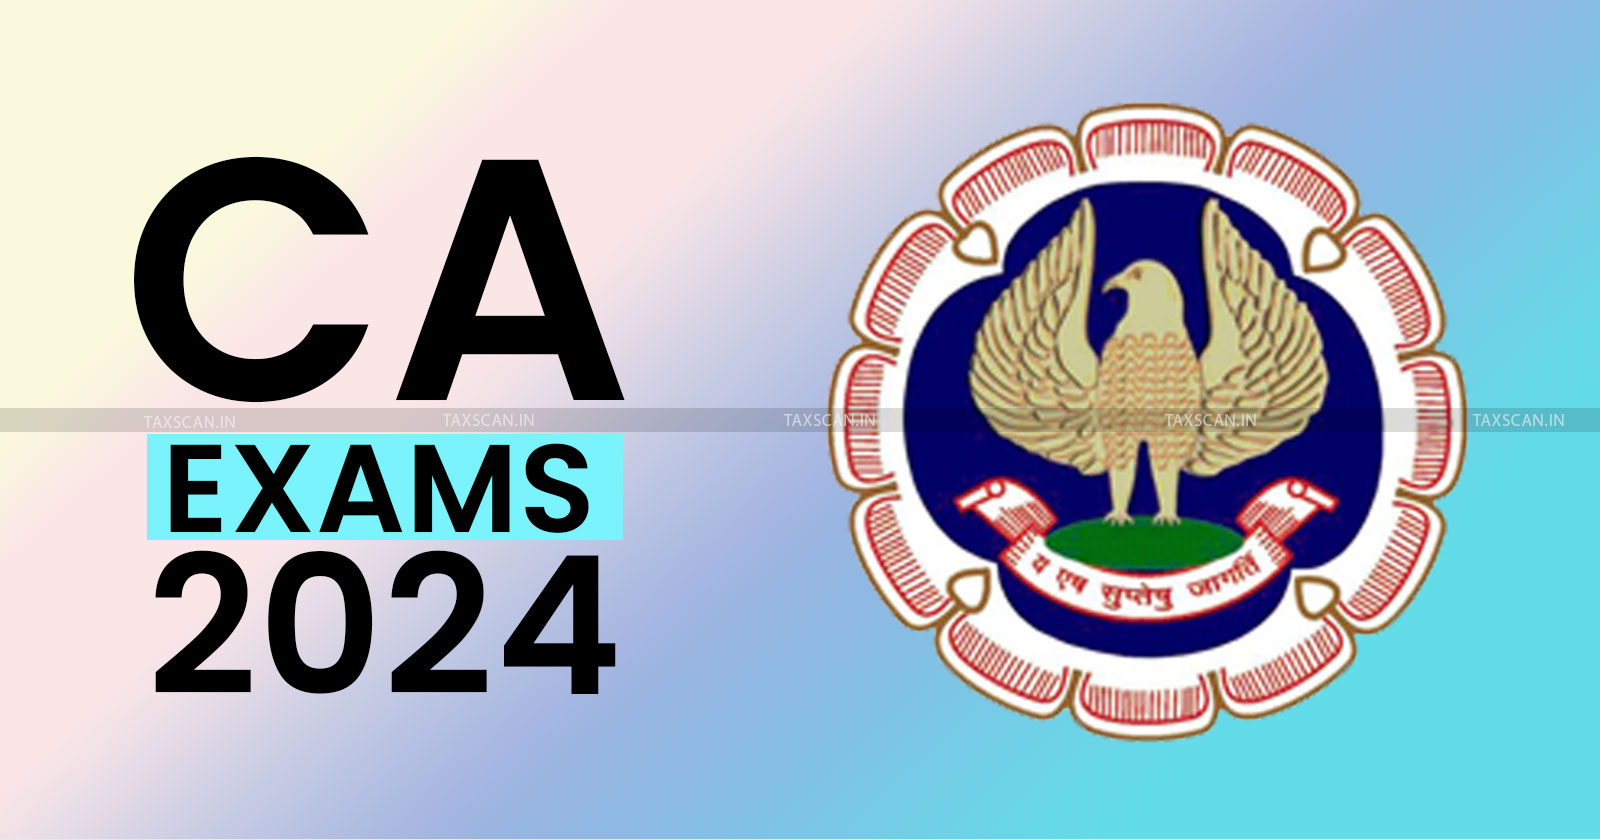 May 2024 CA Exams - ICAI invites Observations - Candidates -Question Papers - taxscan